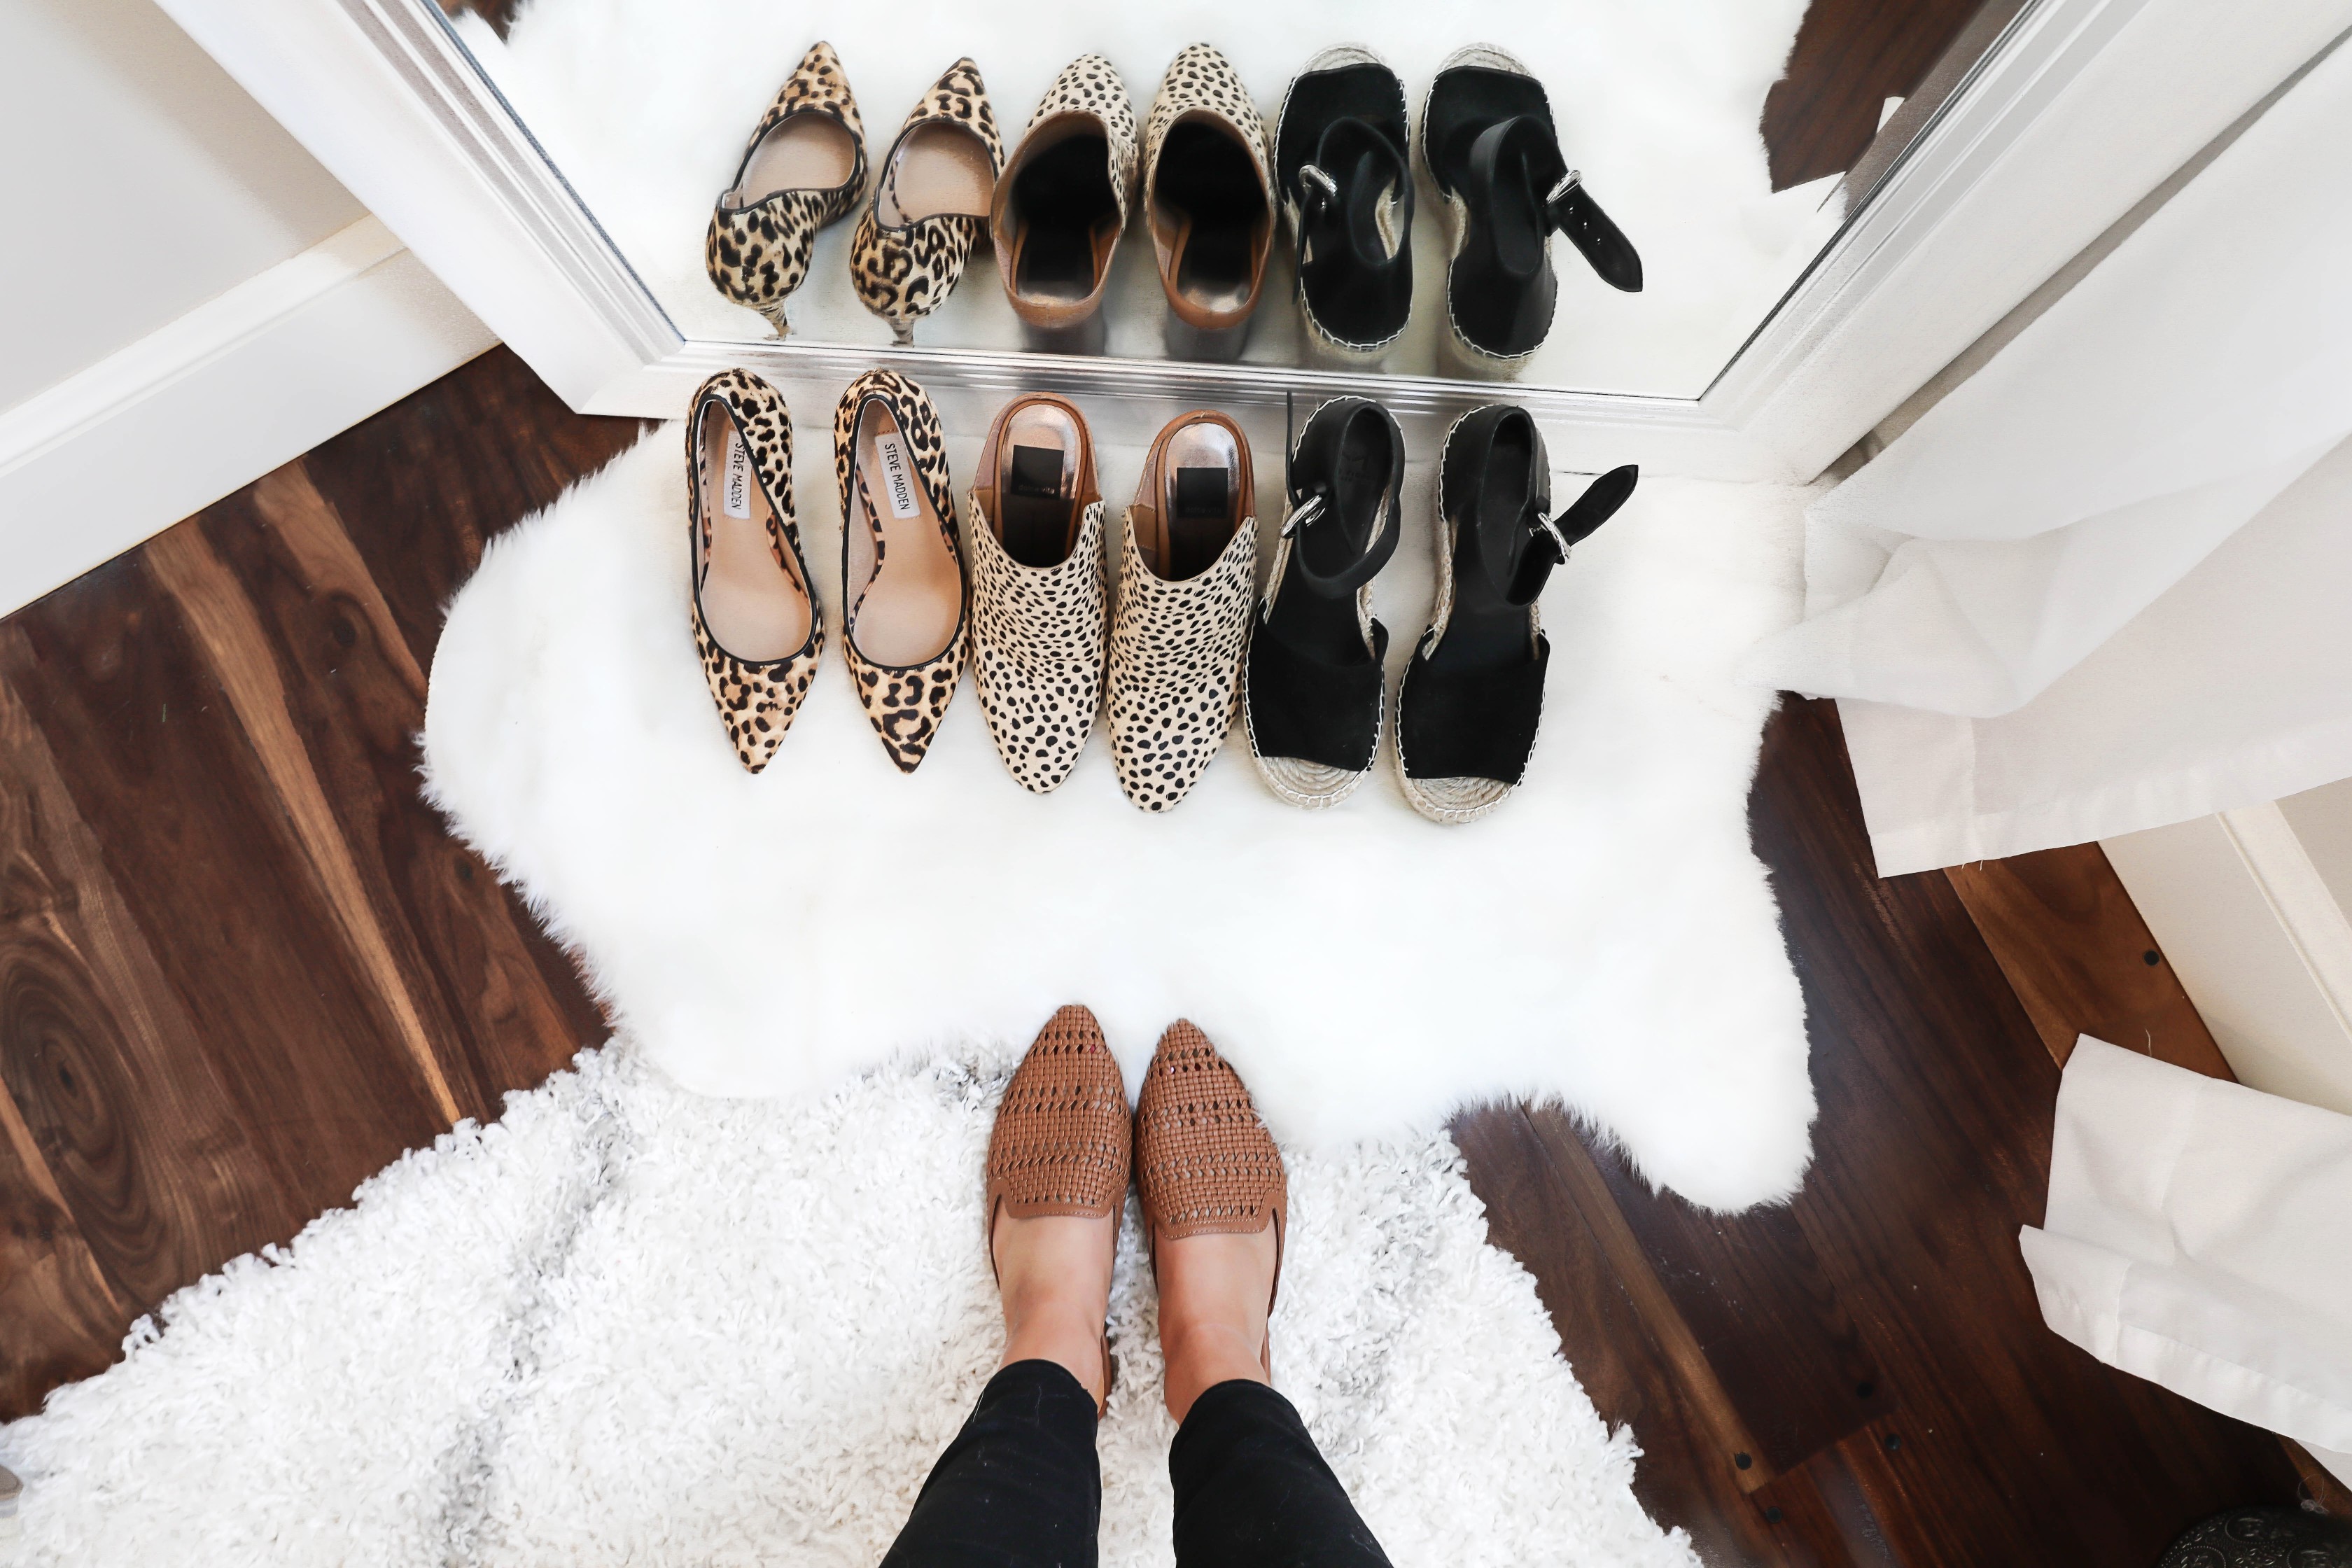 Spring shoe roundup 2019! All the cutest sandals, leopard heels, wedges, sneakers and more! All from target and Nordstrom! The cutest boutique photo Inso on white rugs! Details on fashion blog daily dose of charm by lauren lindmark